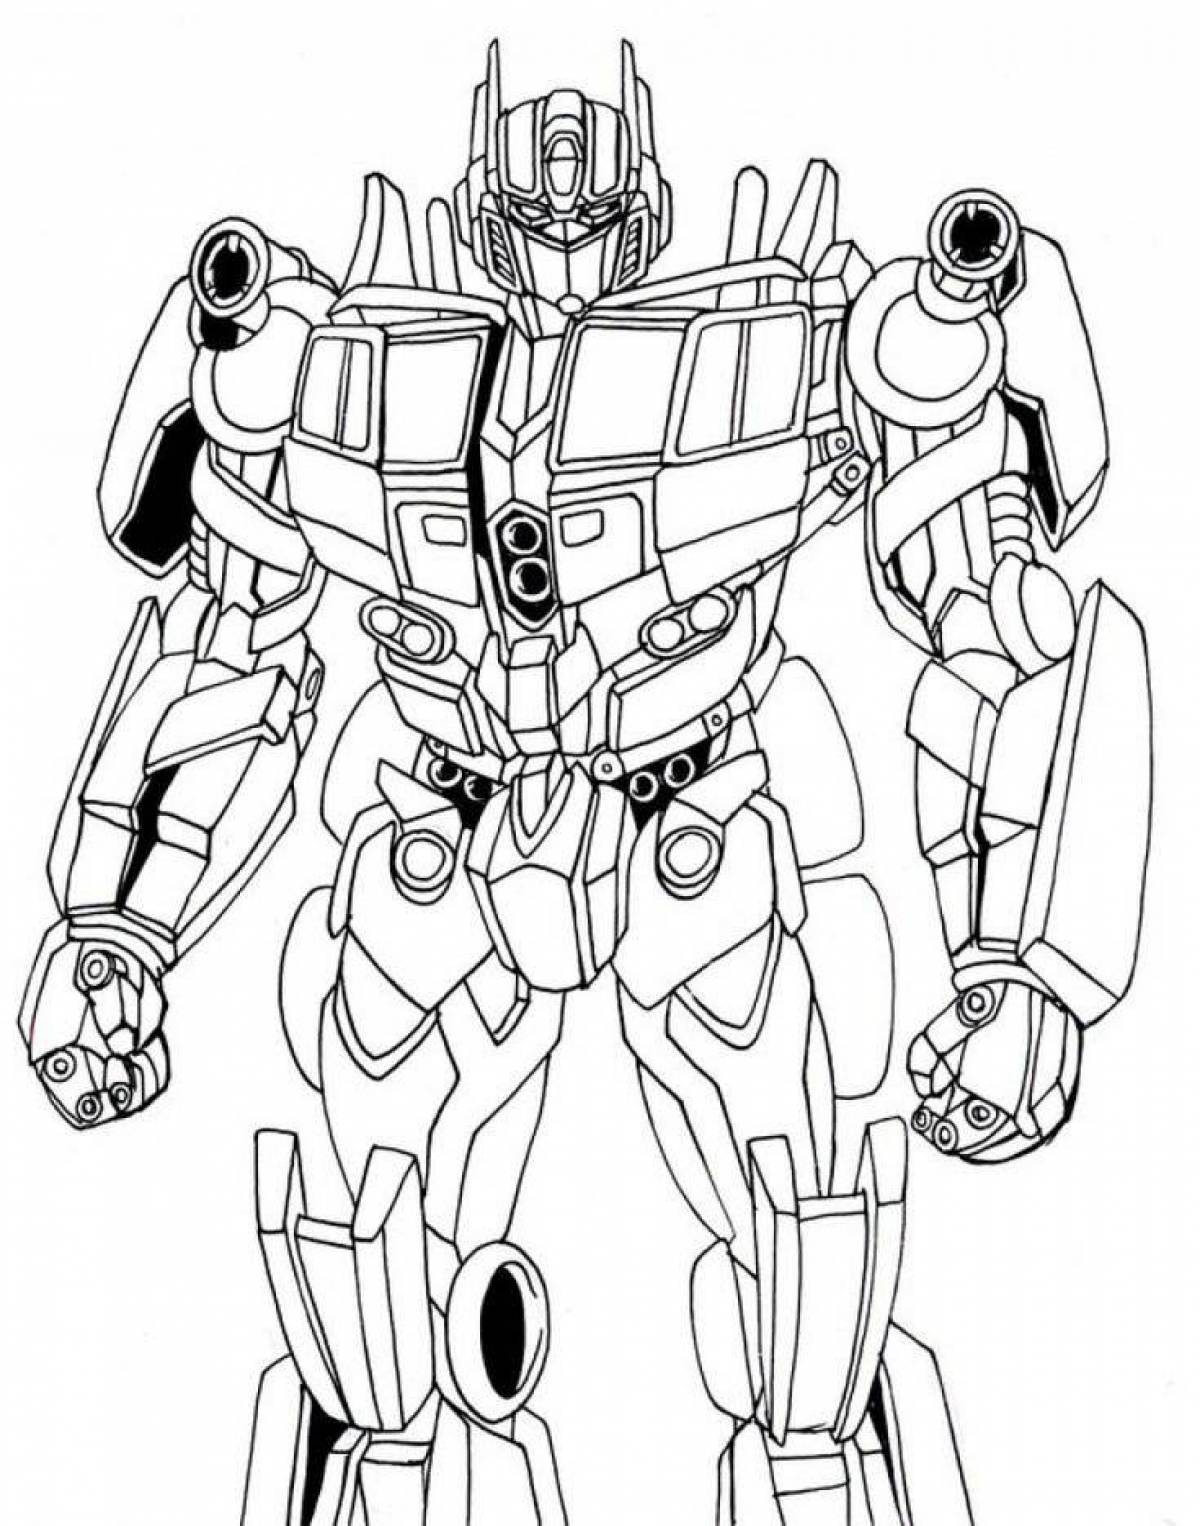 Great transformers coloring page